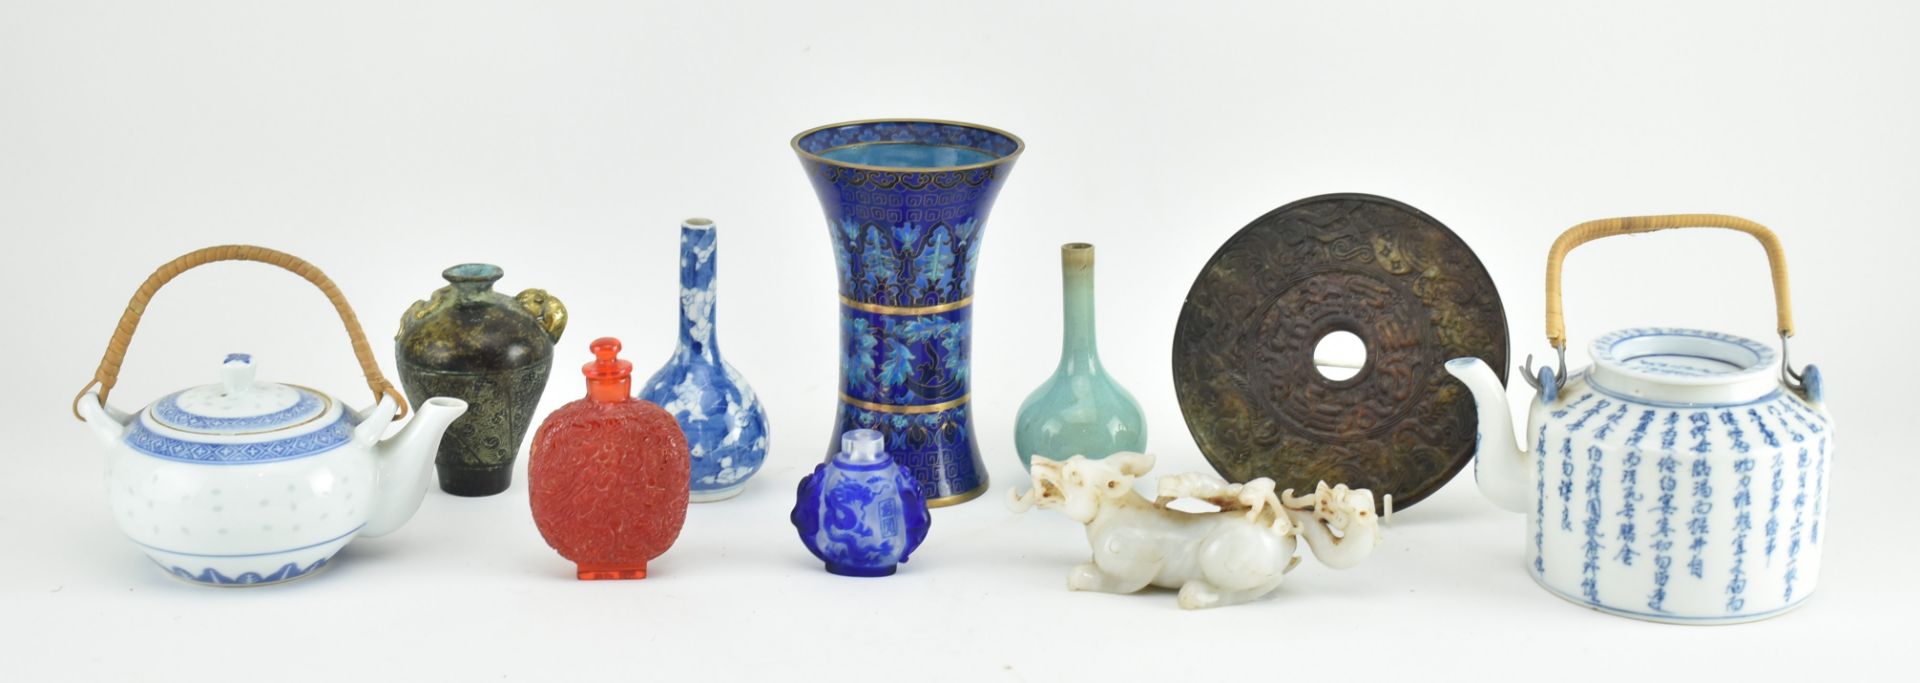 COLLECTION OF TEN 19/20TH CENTURY CHINESE AND JAPANESE ITEMS